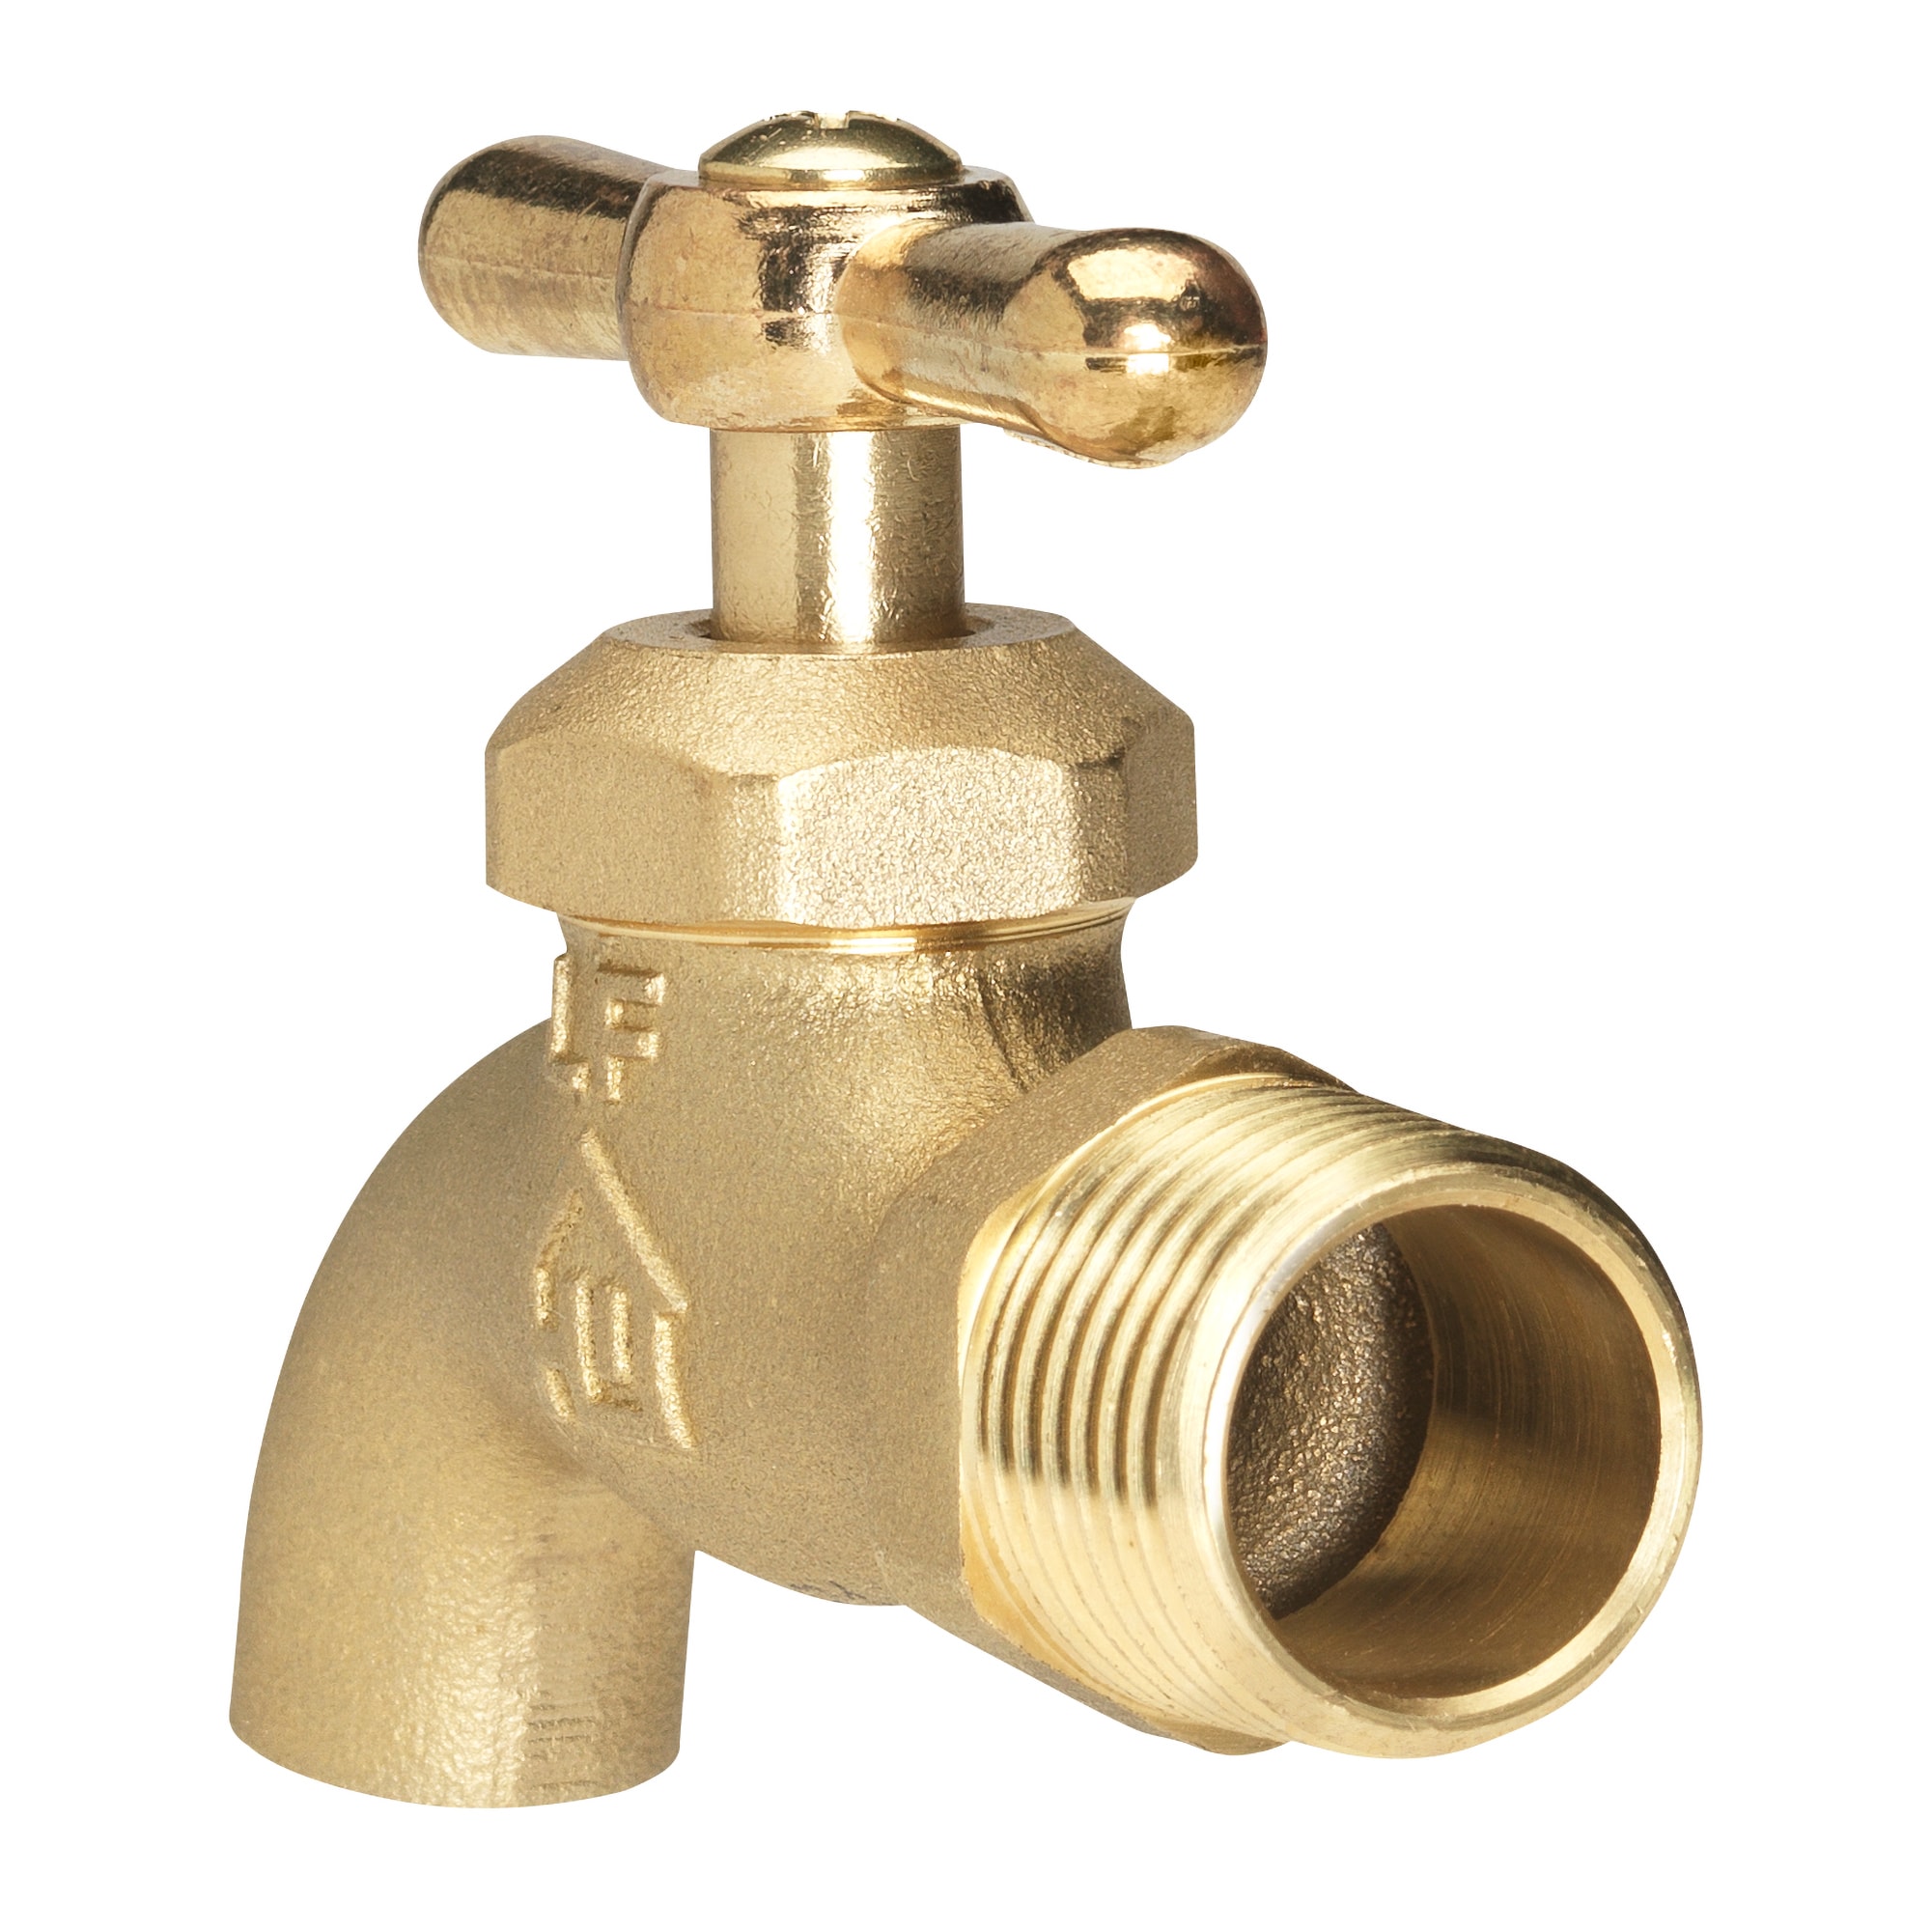 Mip the in 1/2-in Ball Ball Valve RELIABILT department 1/2-in Valves x at